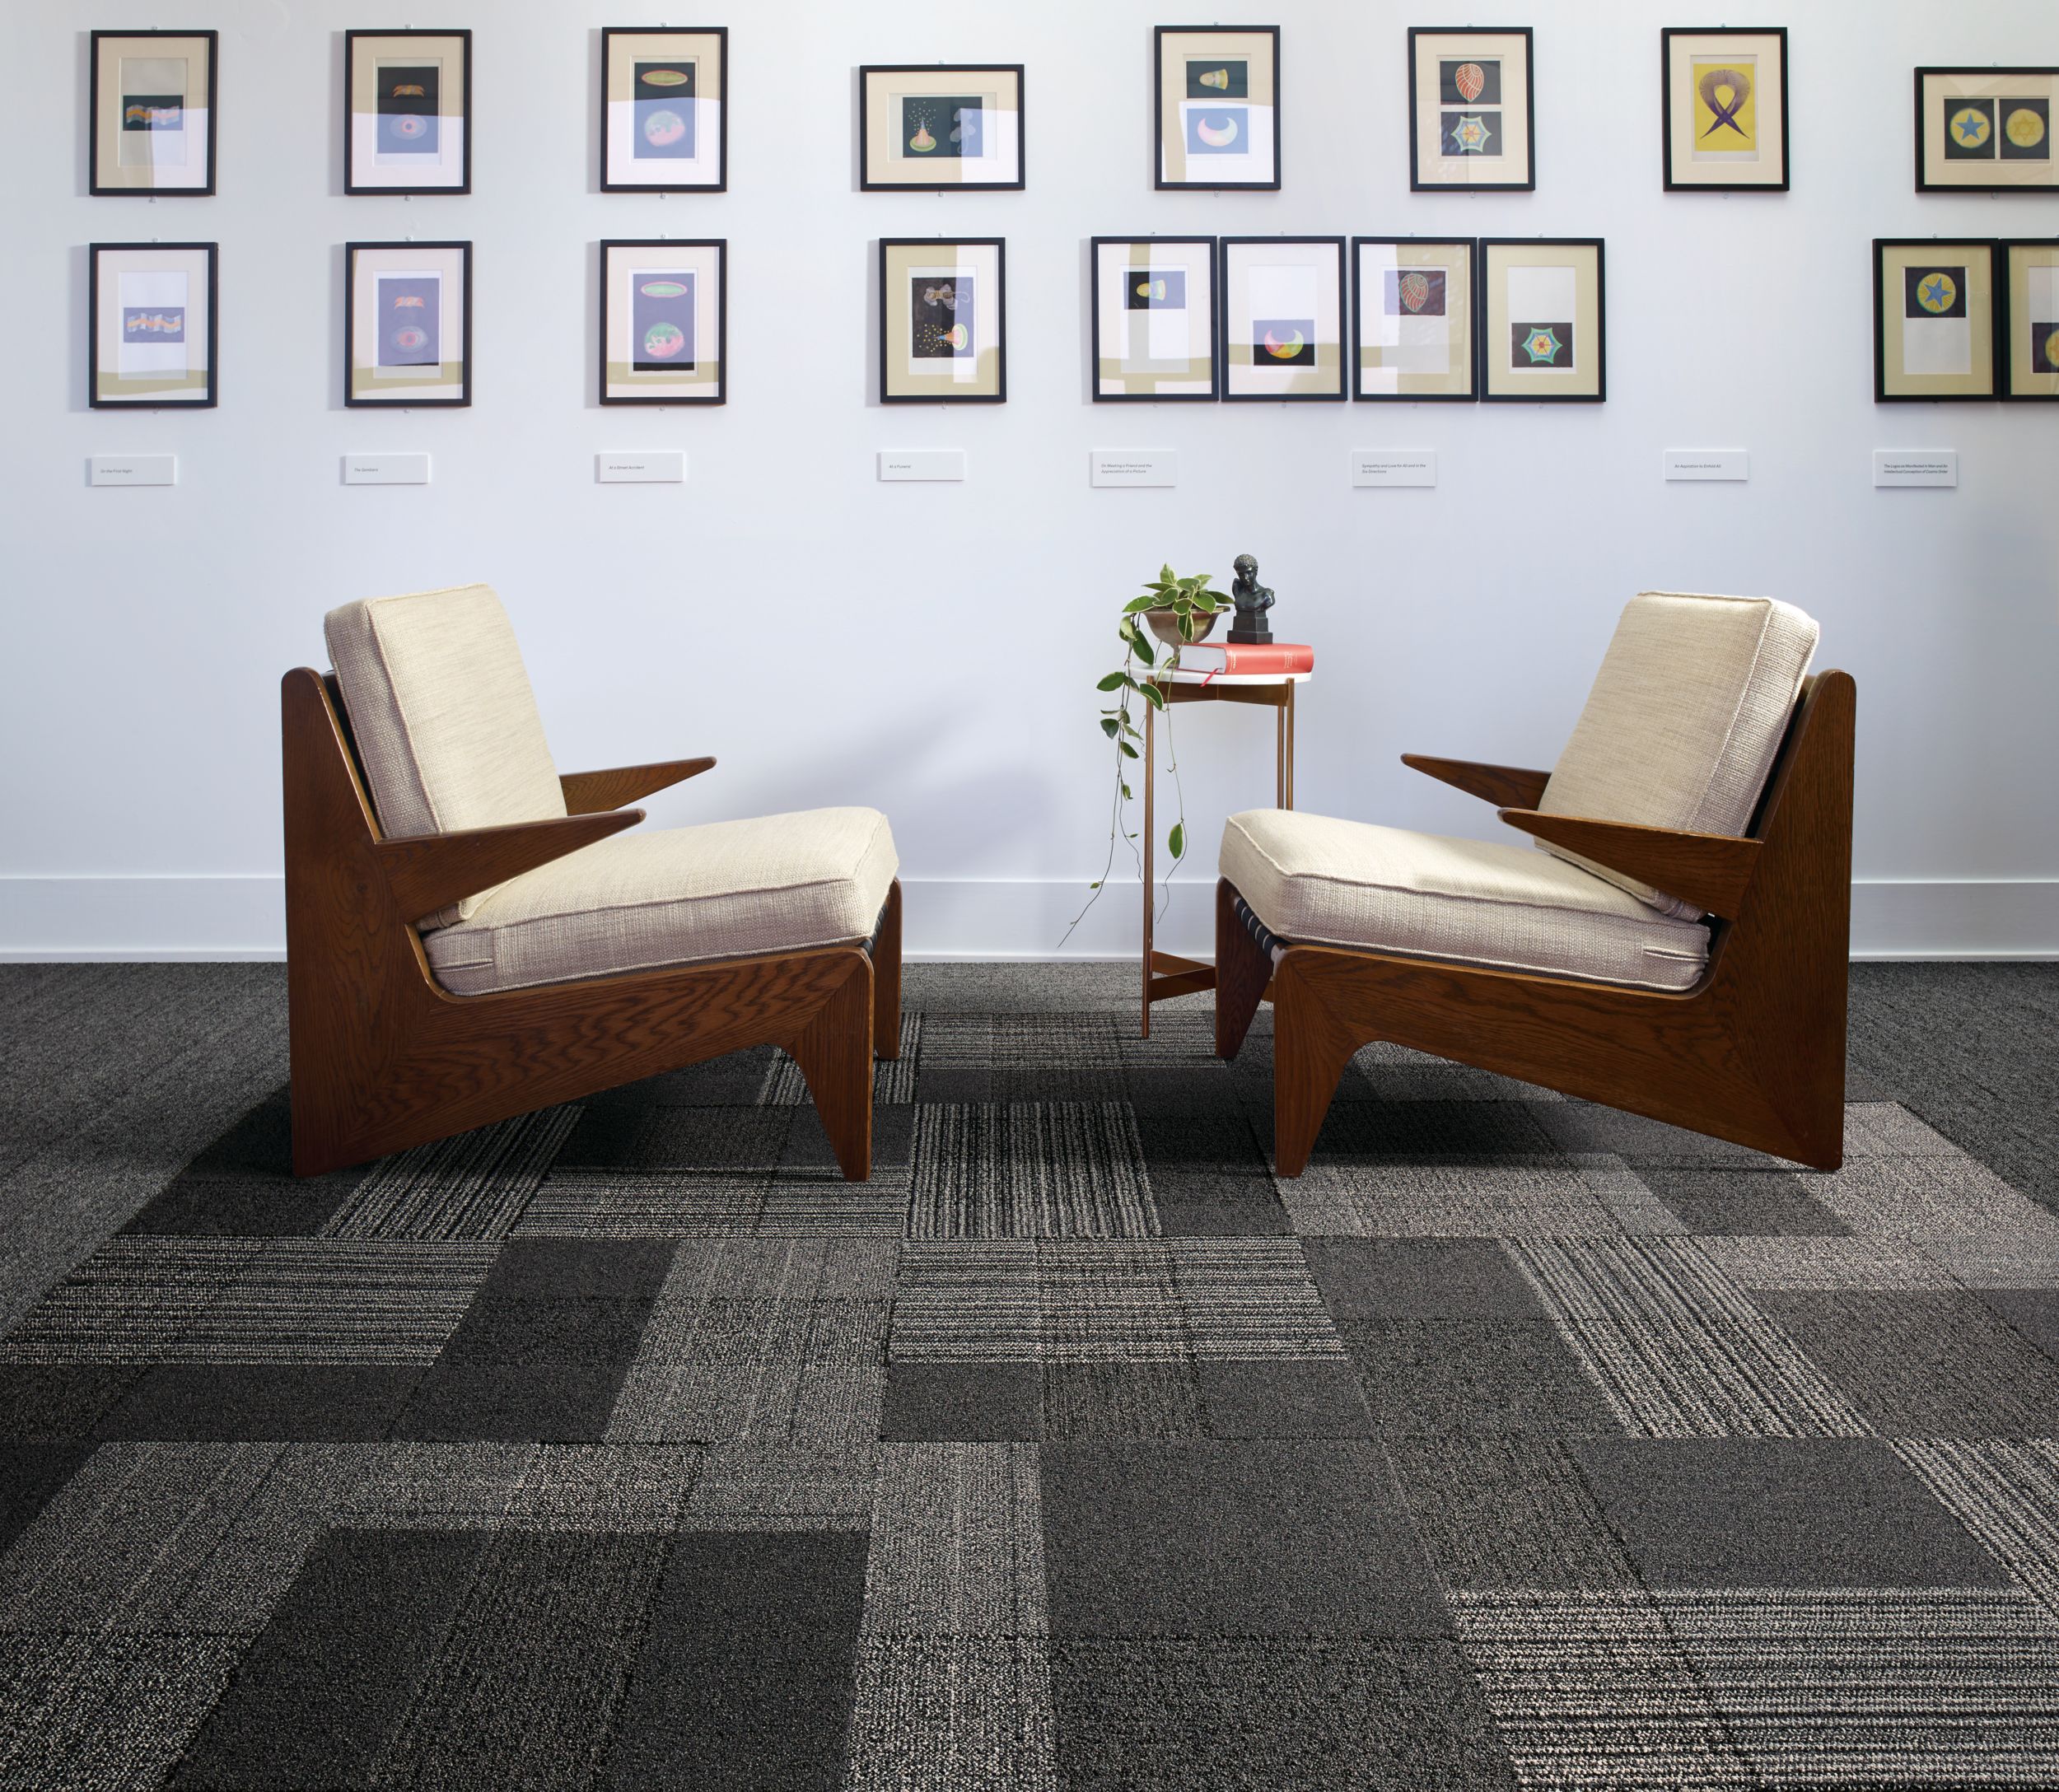 Interface ShadowBox Velour carpet tile and WW860 plank carpet tile in seating area with two chairs and a lot of small prints on the wall Bildnummer 6